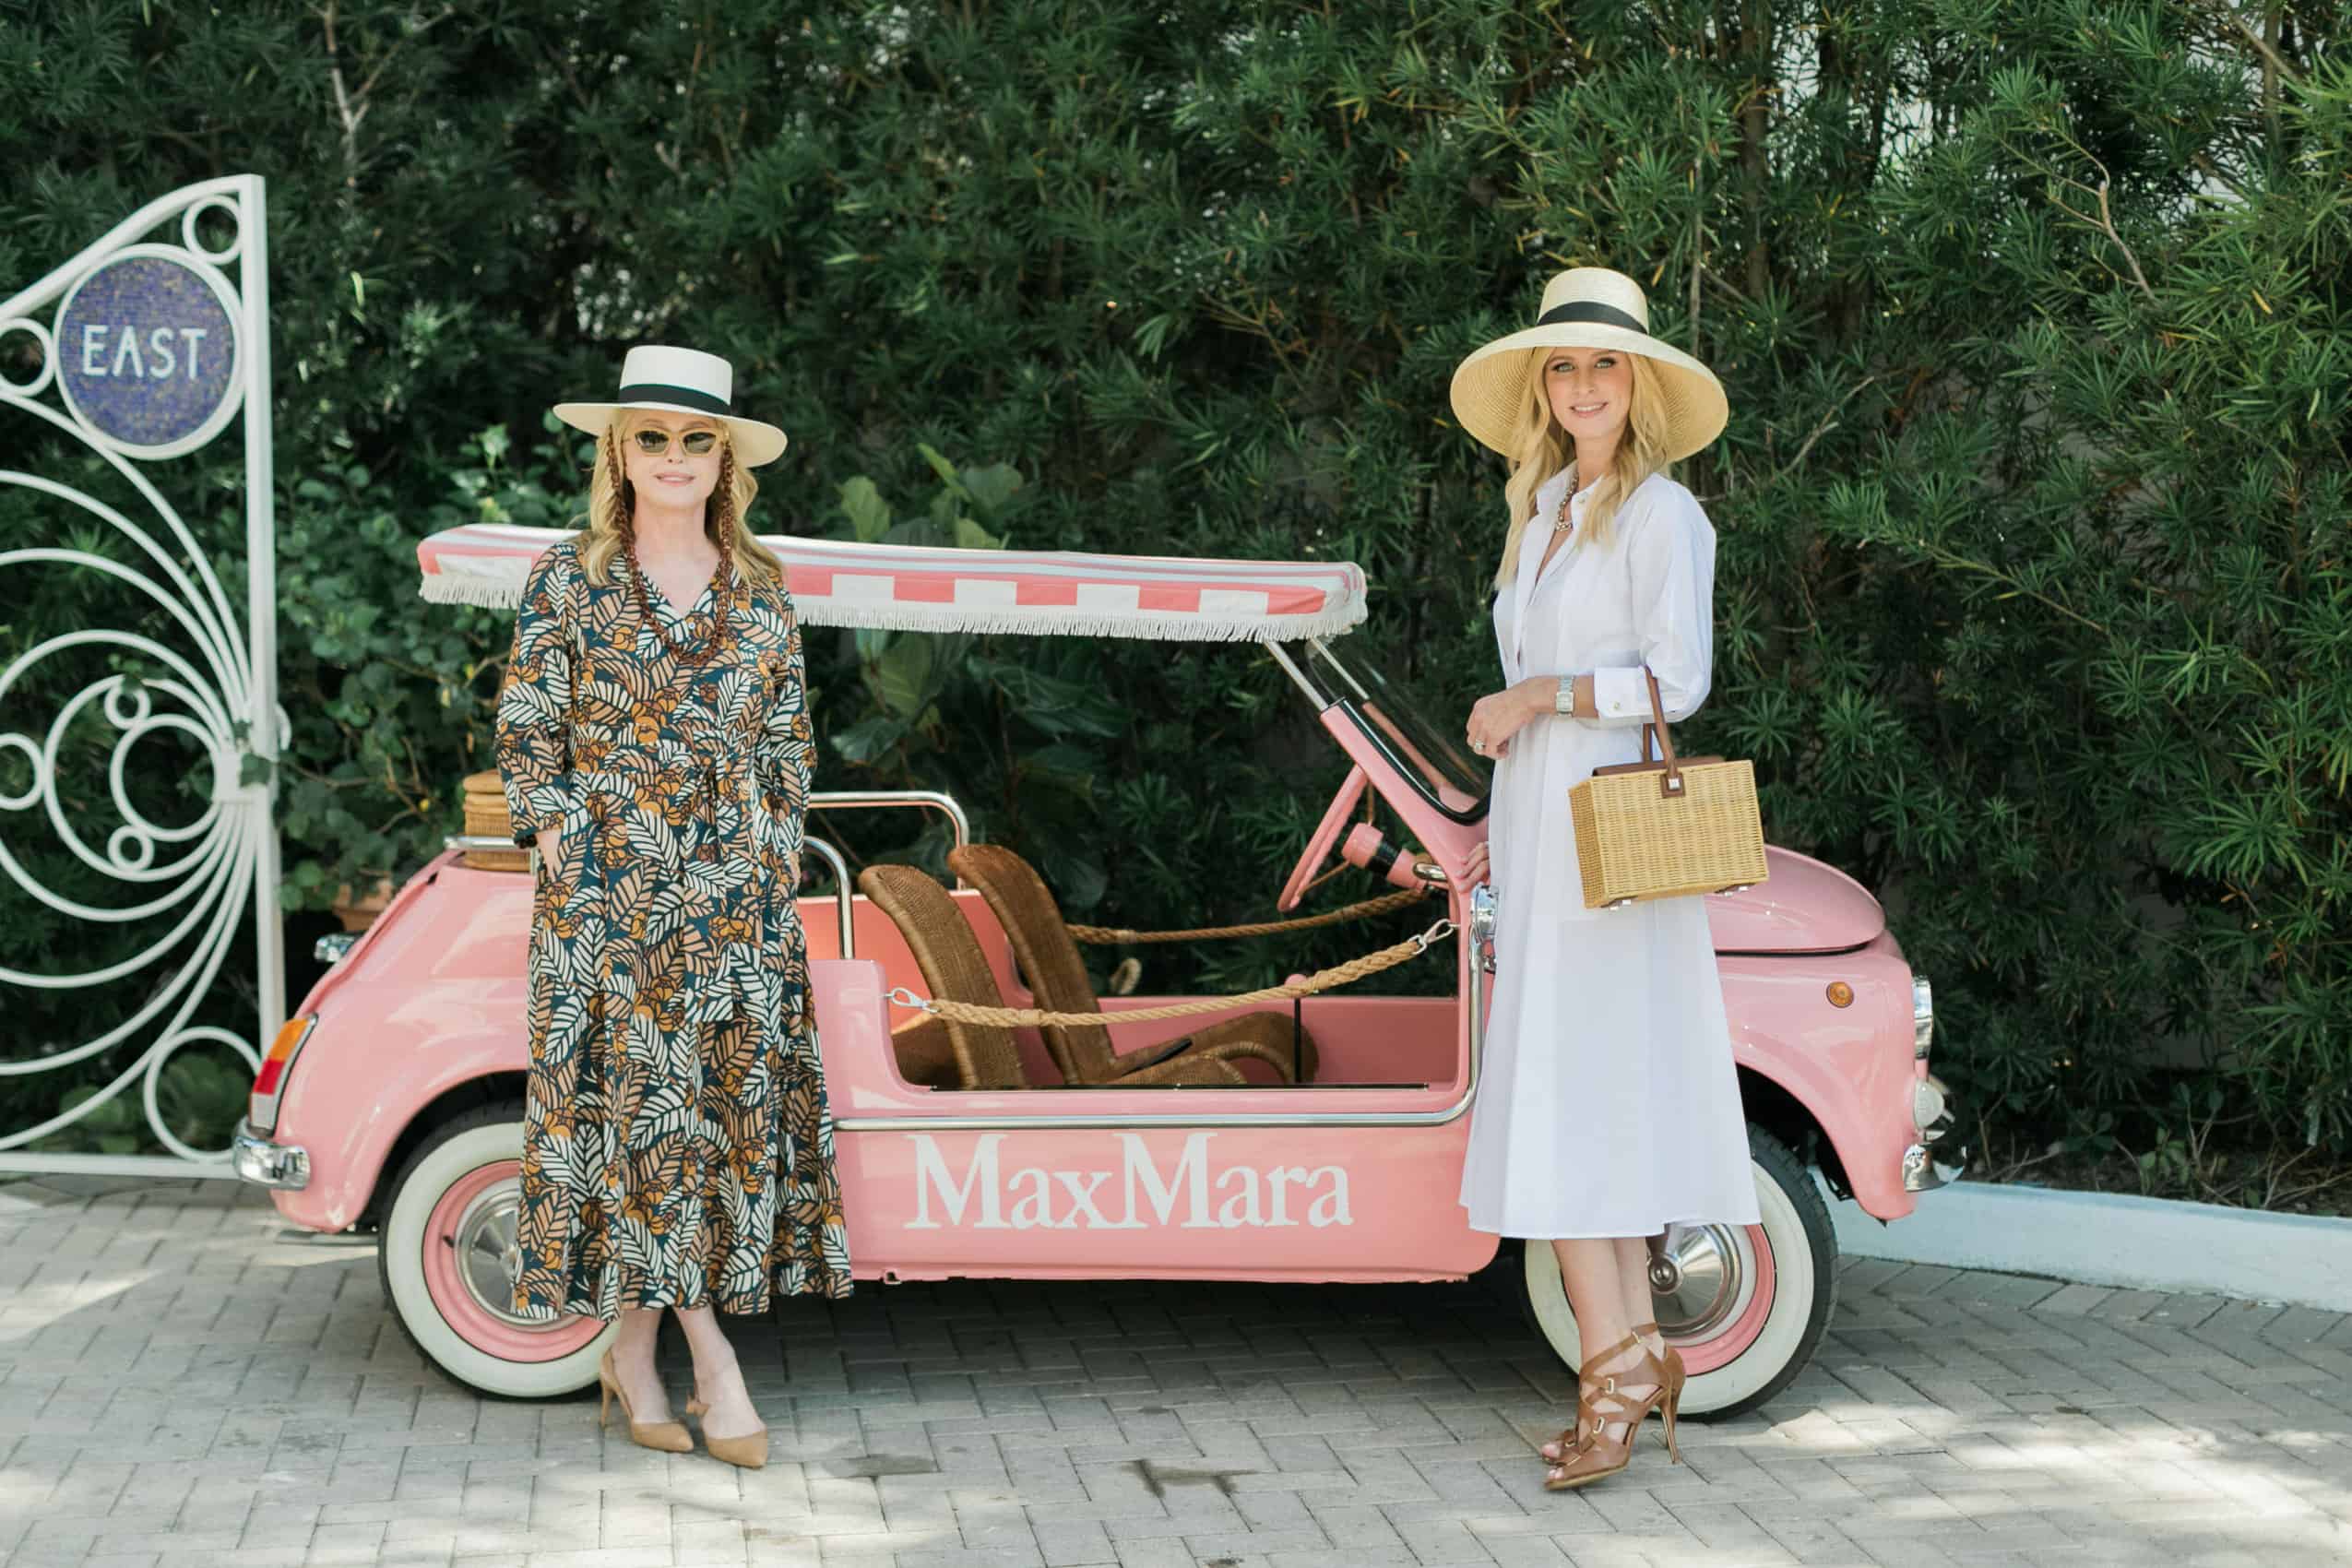 Nicky Hilton Rothschild, Kathy Hilton, and The Daily Palm Beach Celebrate Max Mara’s Spring ’23 Collection